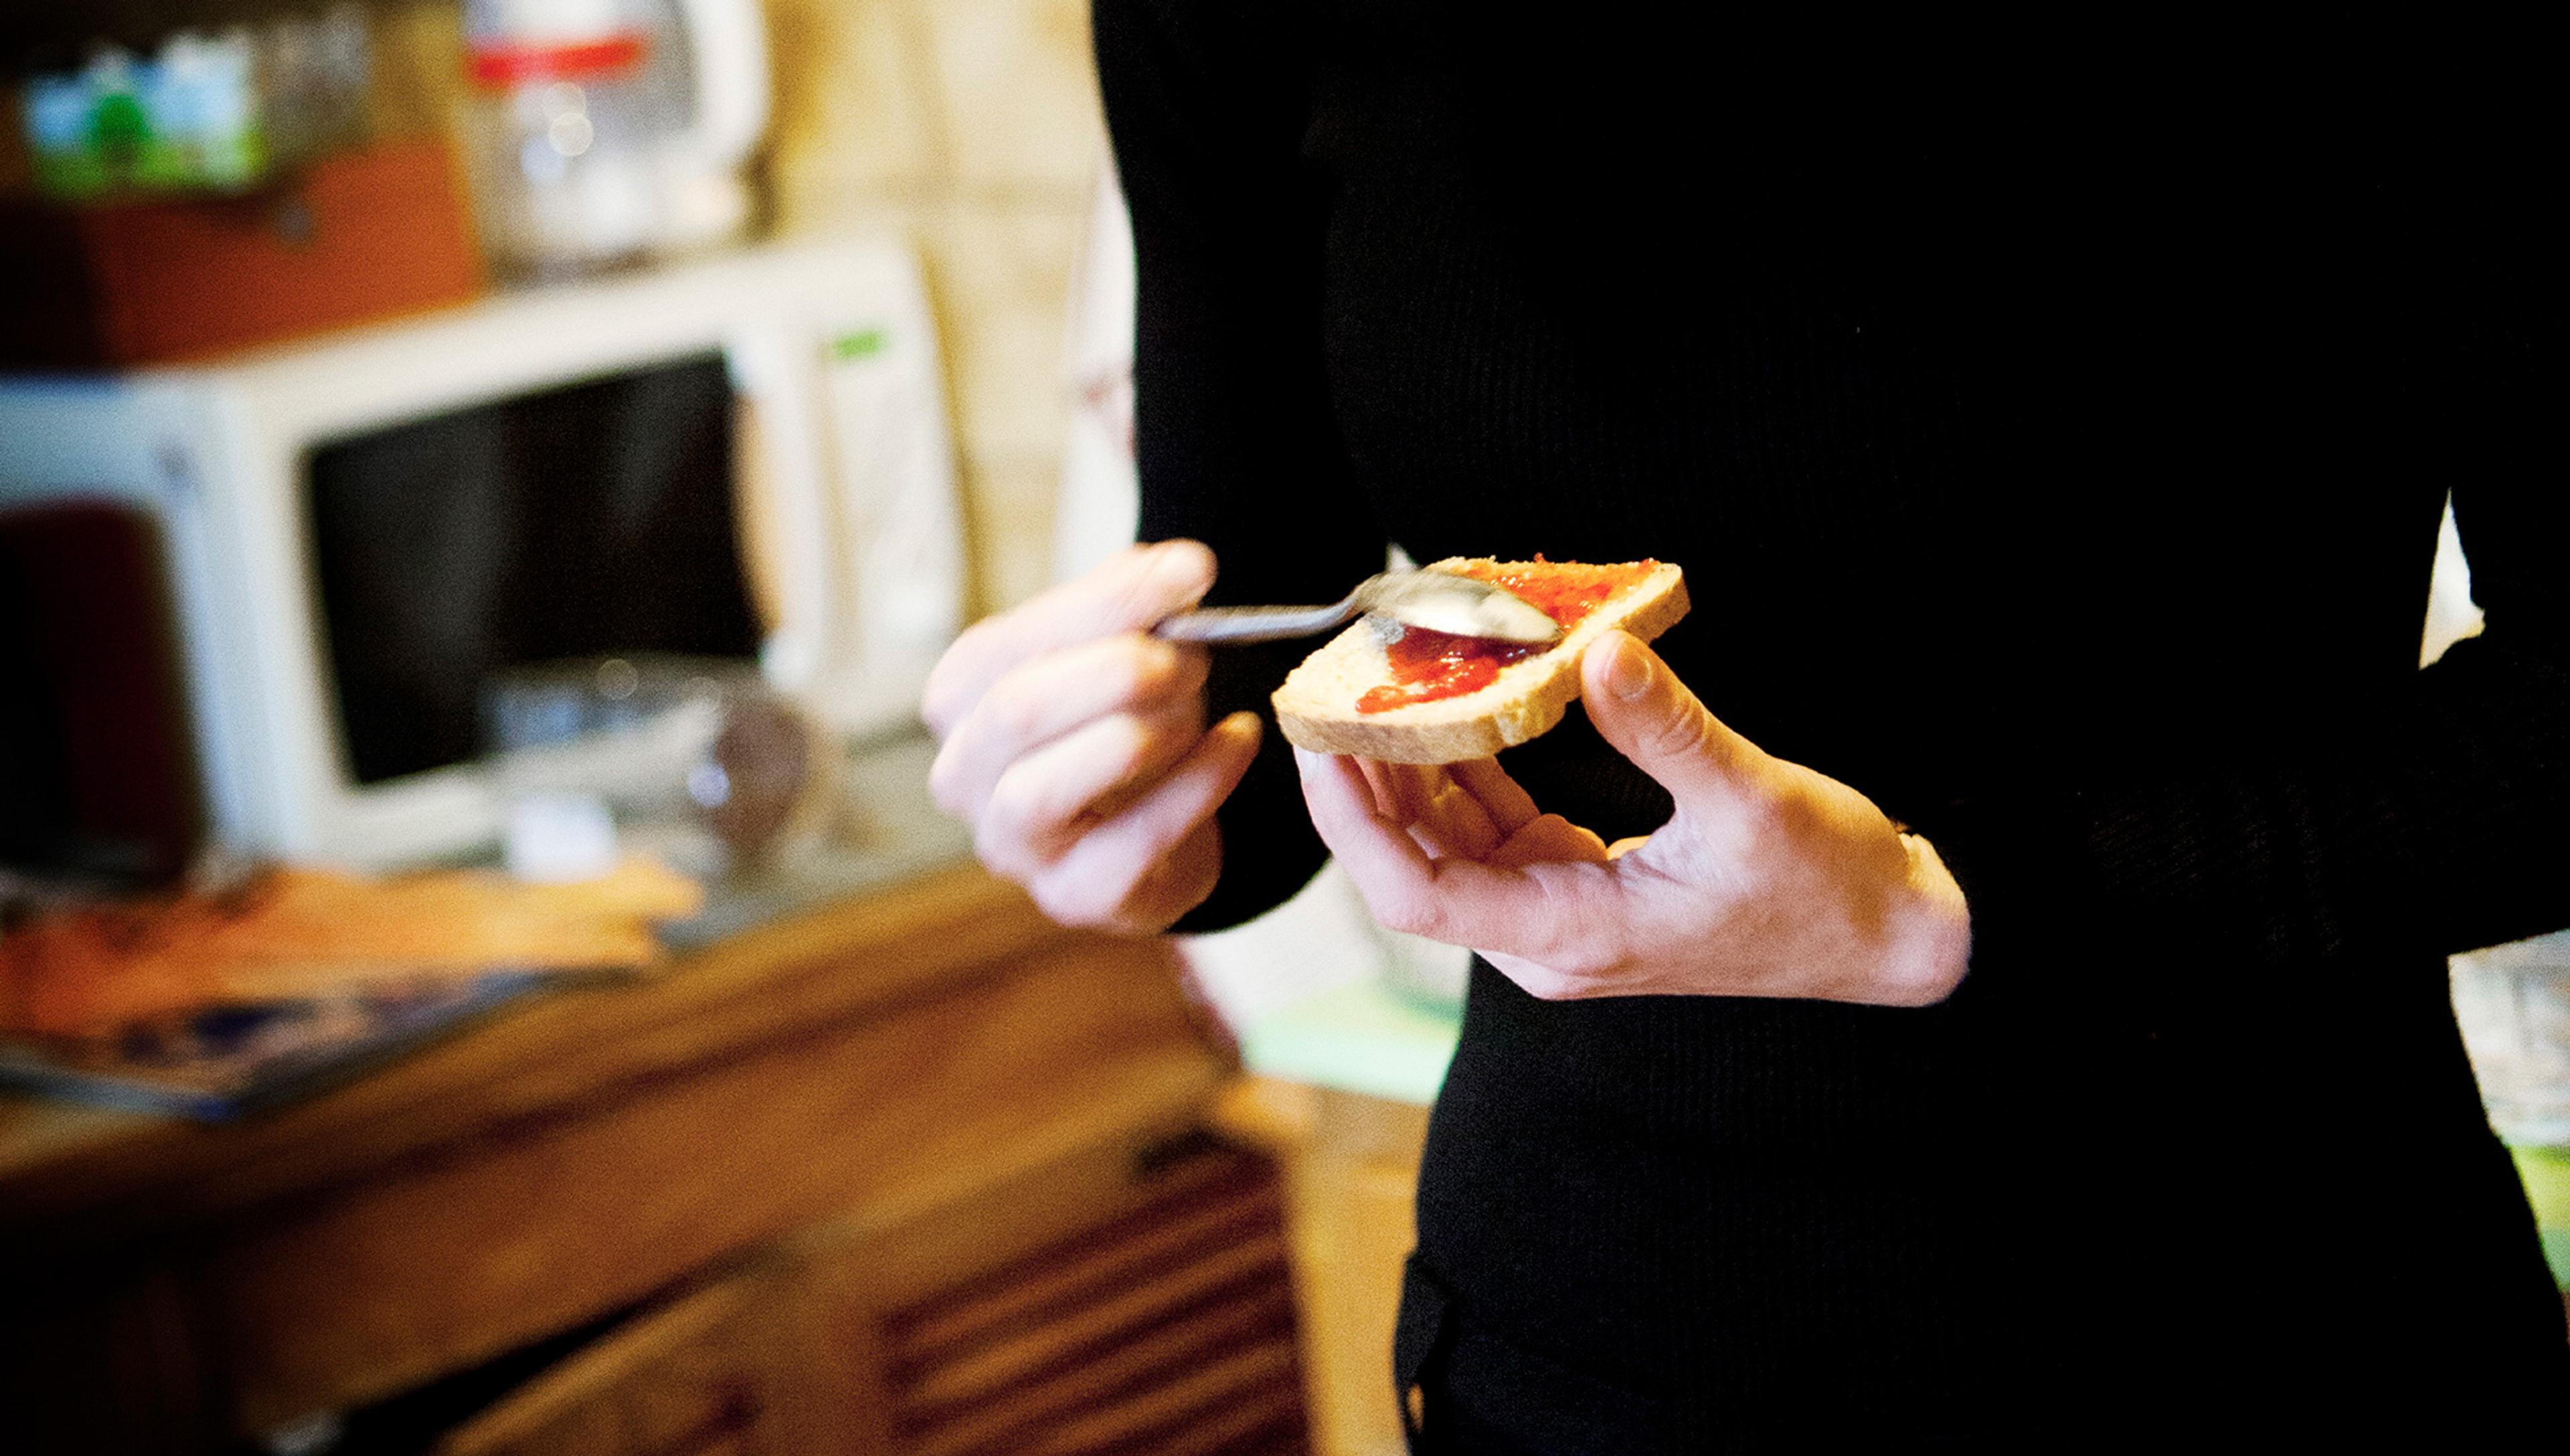 Person spreading strawberry jam on a piece of toast with a spoon in a kitchen setting, with a microwave and wooden countertop in the background.